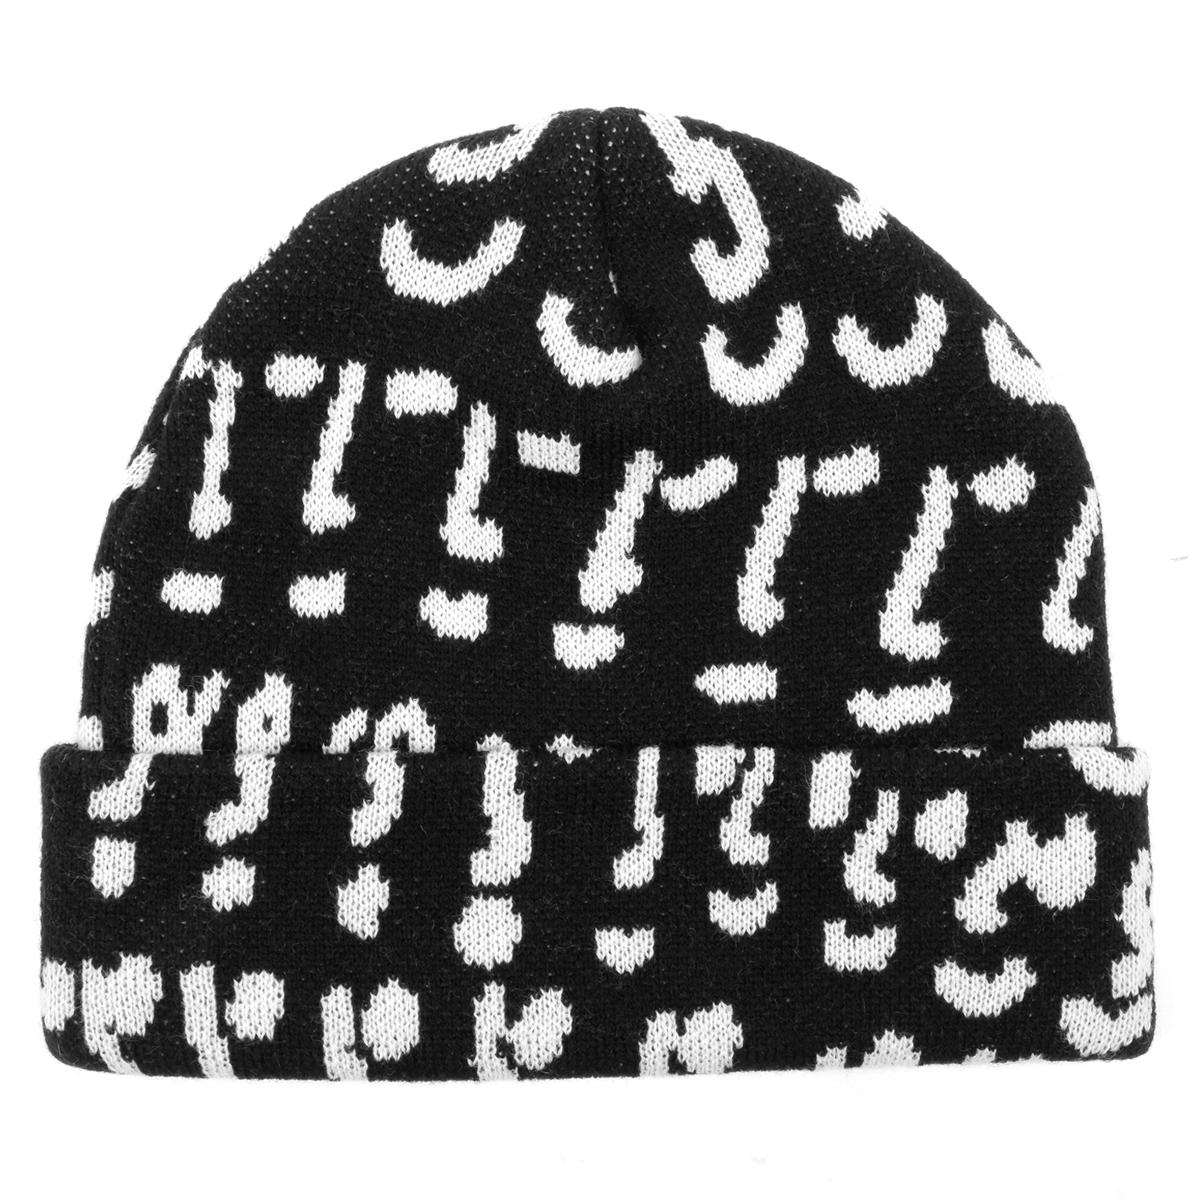 PASS～PORT(パスポート) |PASSPORT SKATEBOARDS - MANY FACES BEANIE 